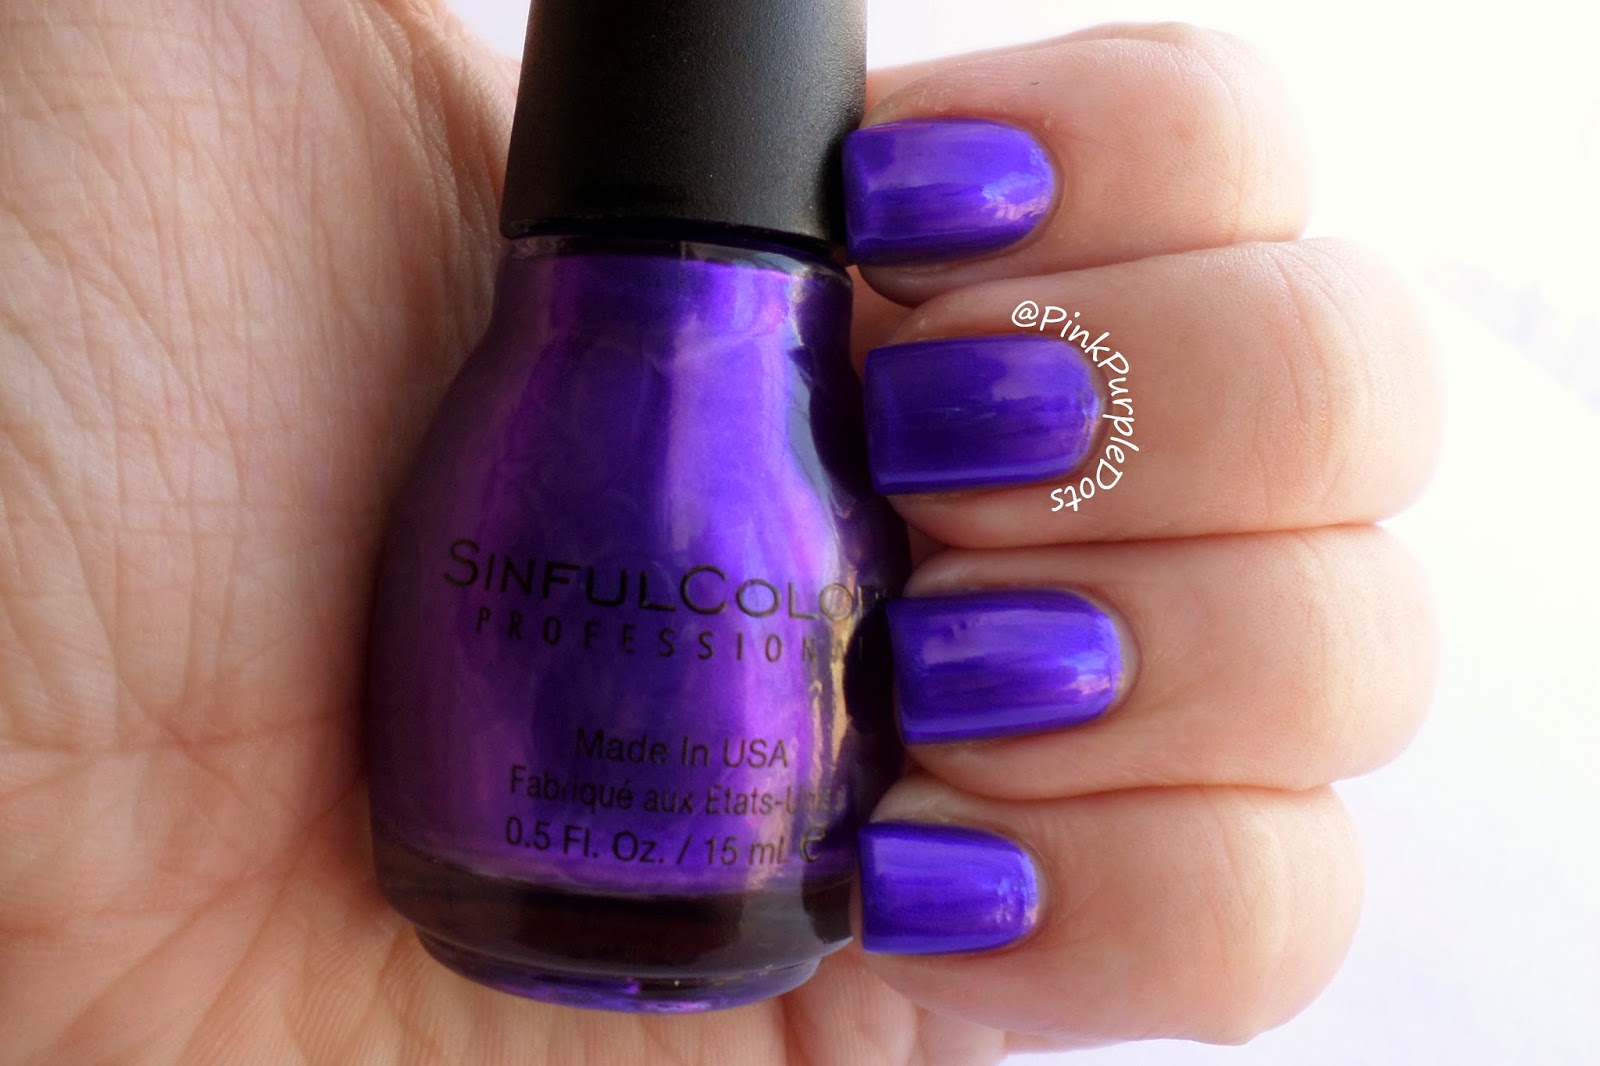 1. Sinful Colors Iridescent Nail Polish - wide 2